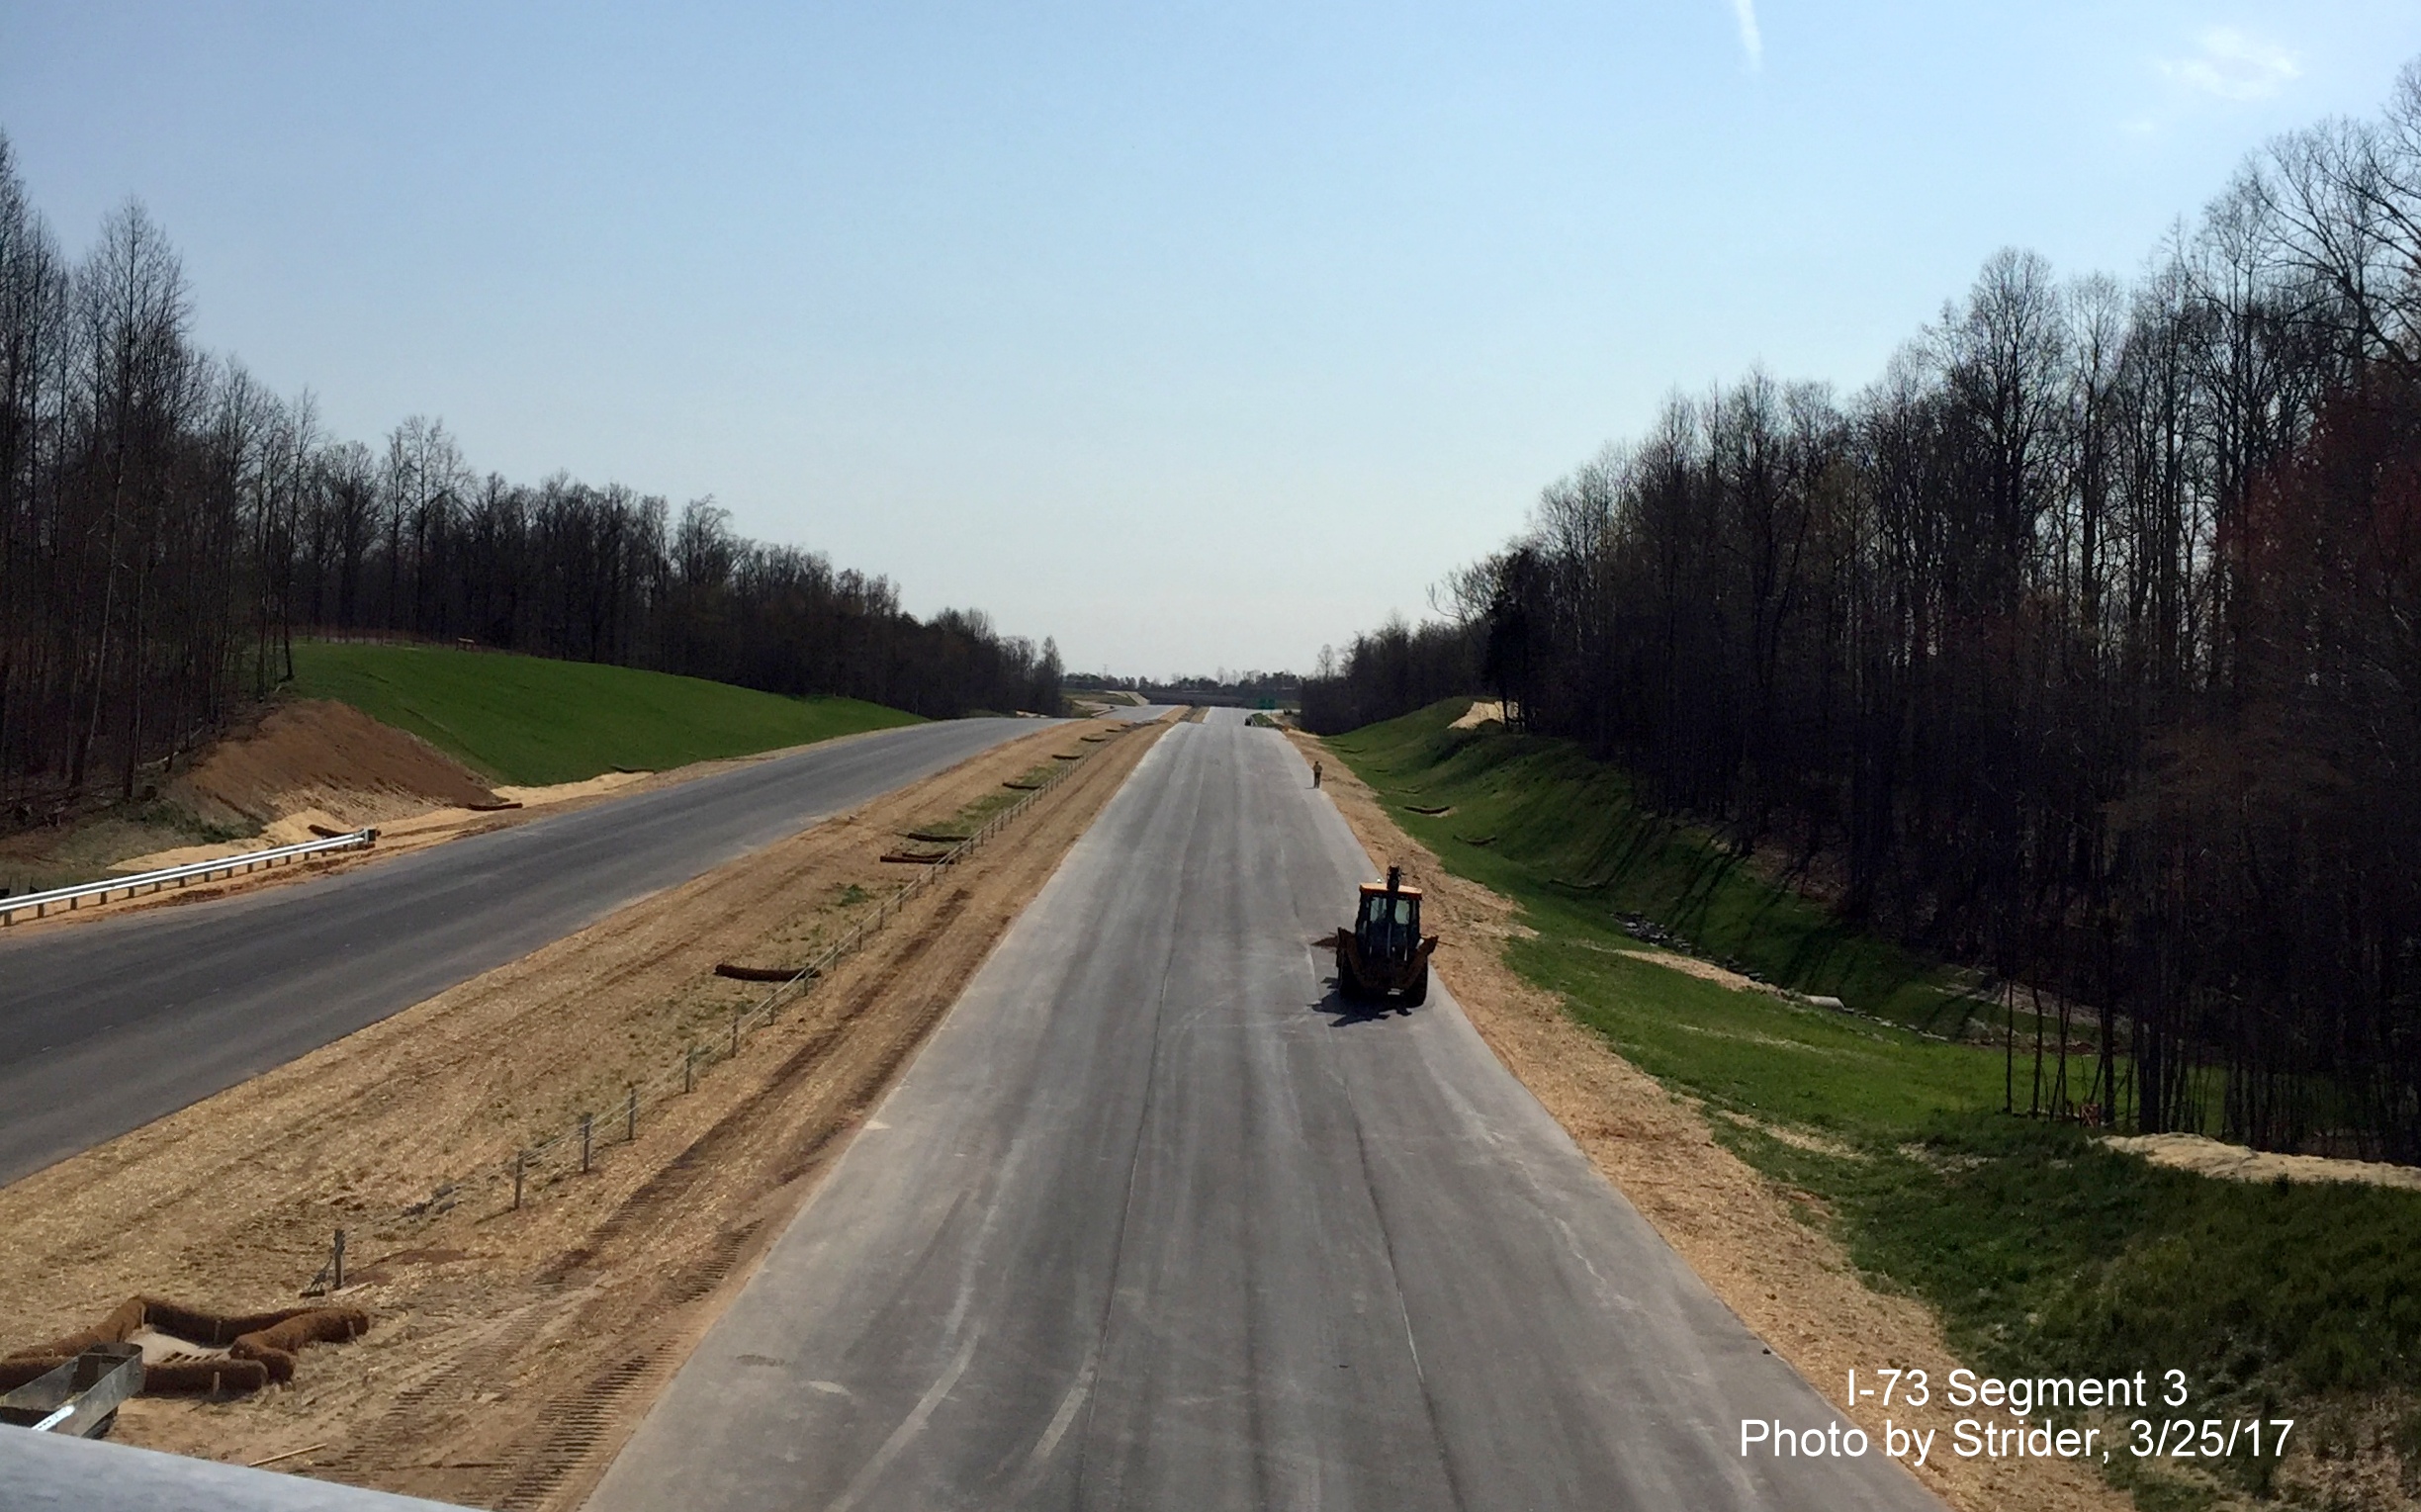 Image of view looking south from Deboe Road showing progress completing I-73 lanes, from Strider